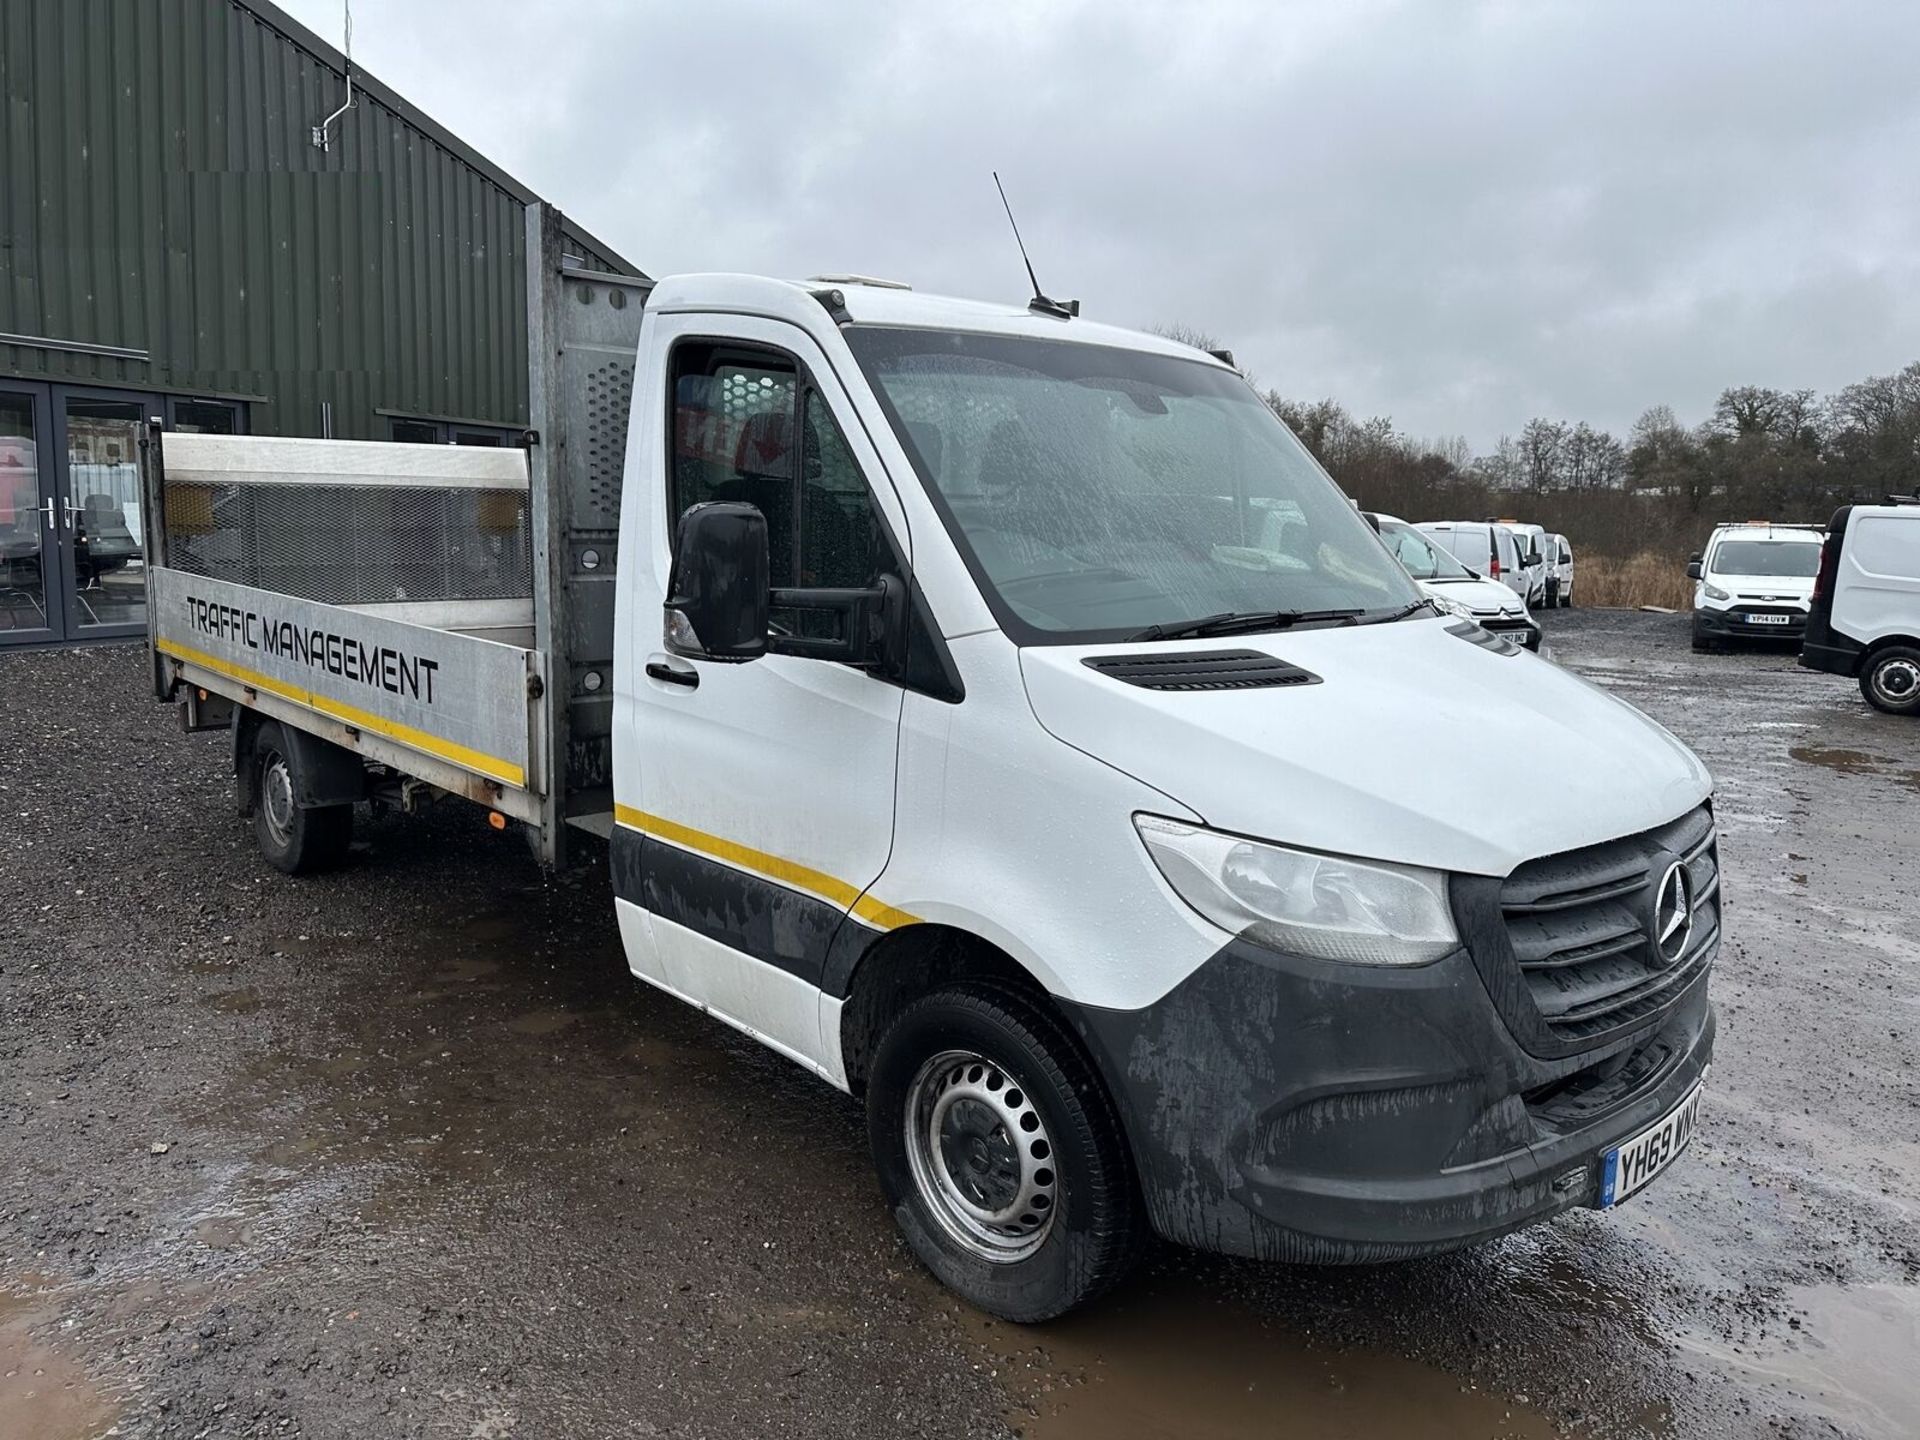 RELIABLE RIDE: 69 PLATE MERCEDES SPRINTER 314 CDI RECOVERY VEHICLE >>--NO VAT ON HAMMER--<<